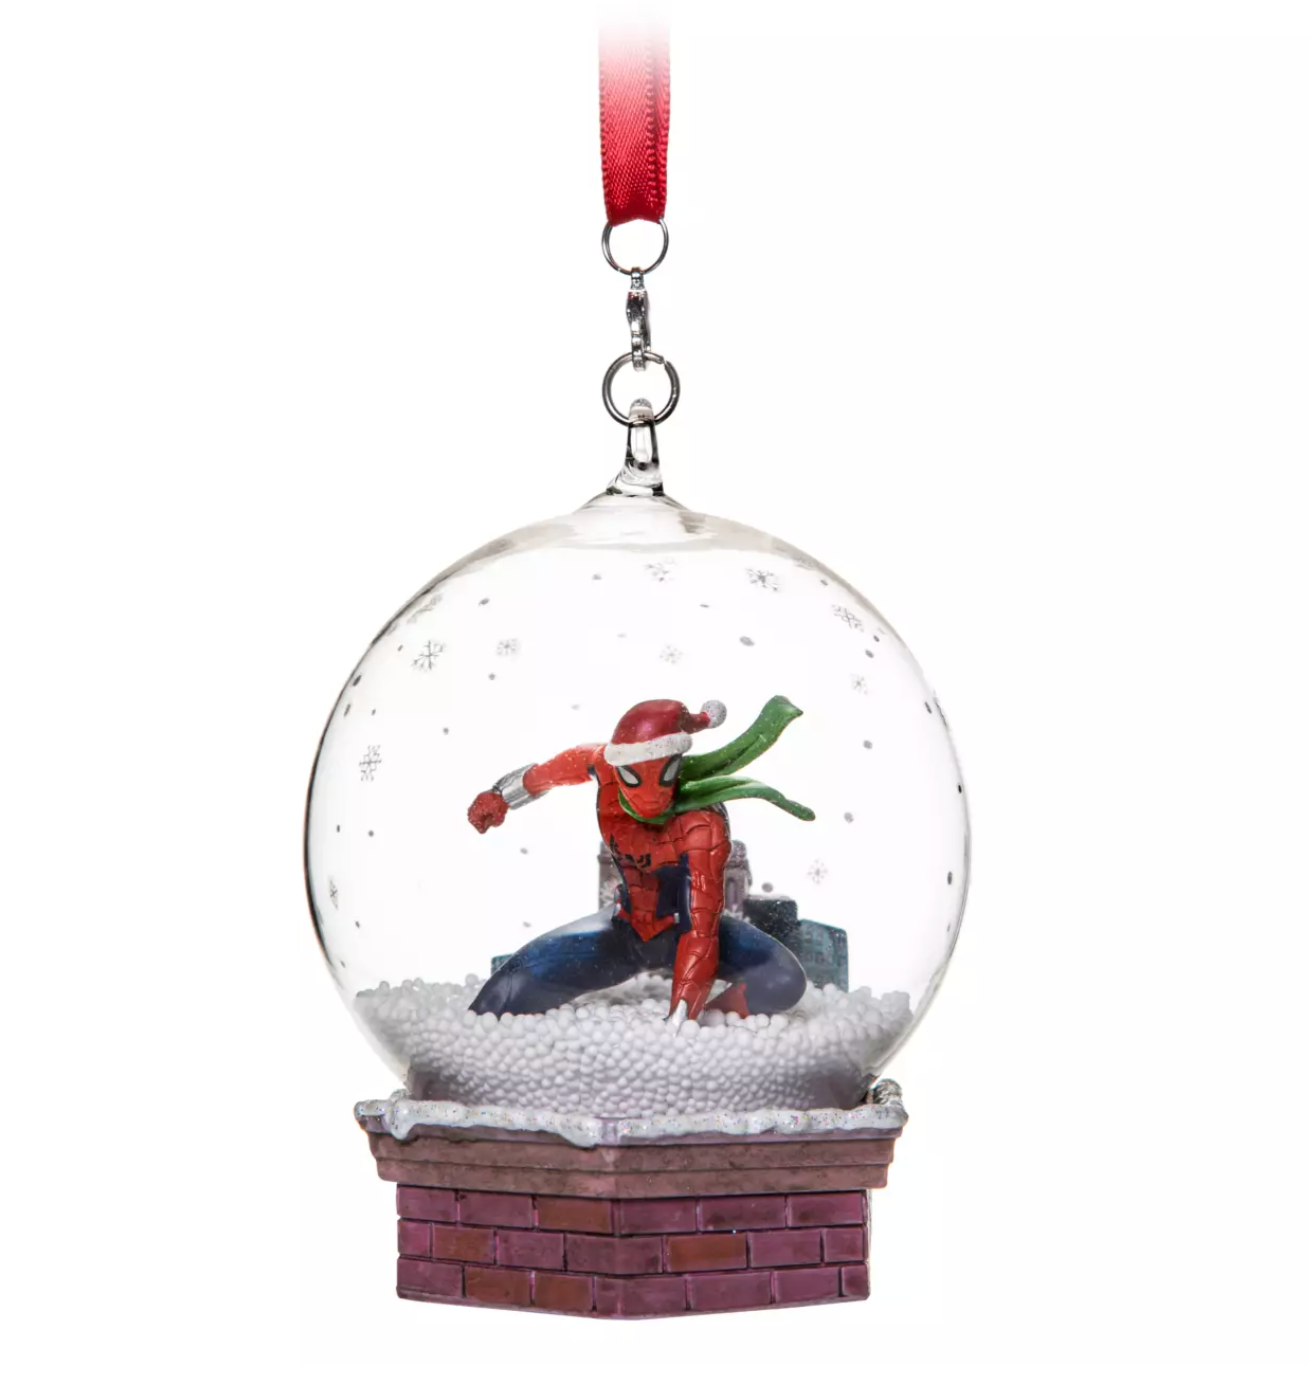 Disney Sketchbook Spider-Man Snowglobe Christmas Ornament New with Tag